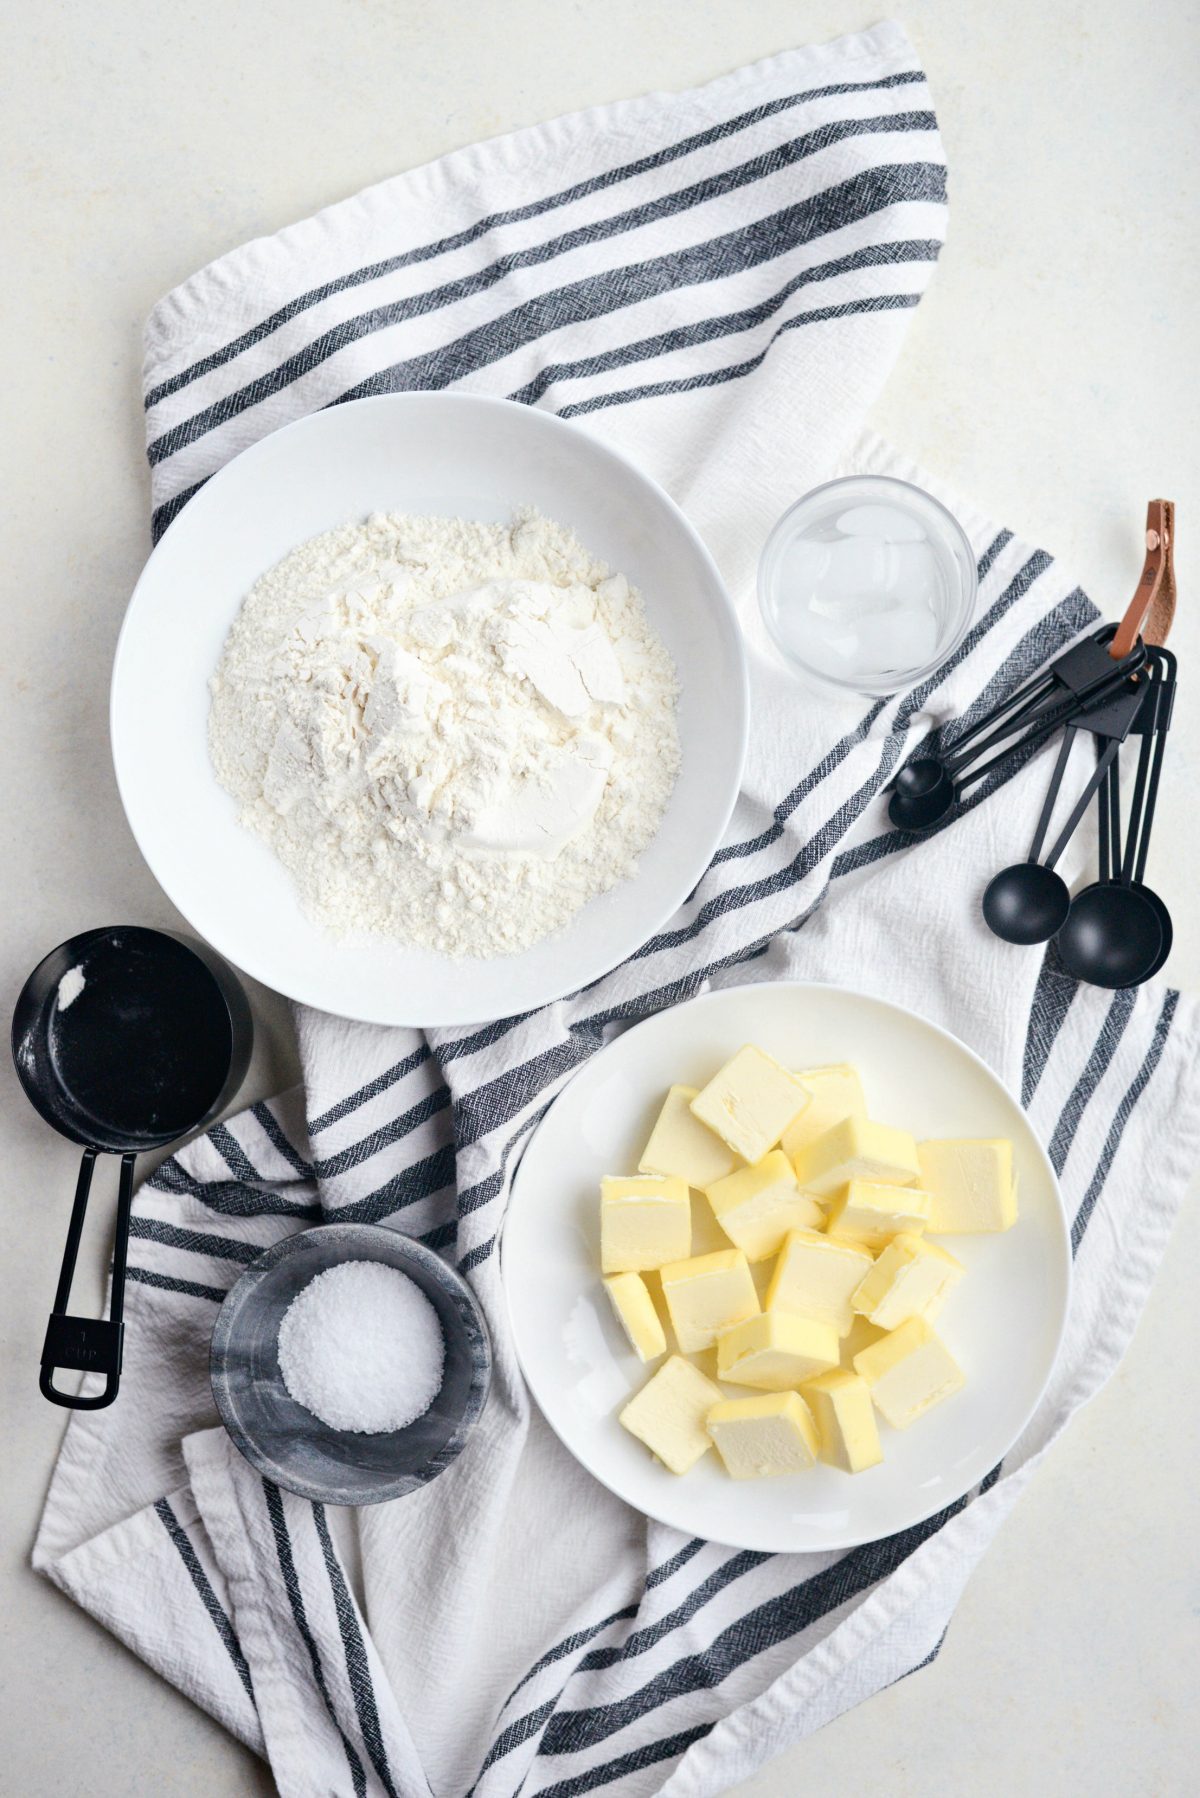 ingredients for Homemade Pie Crust